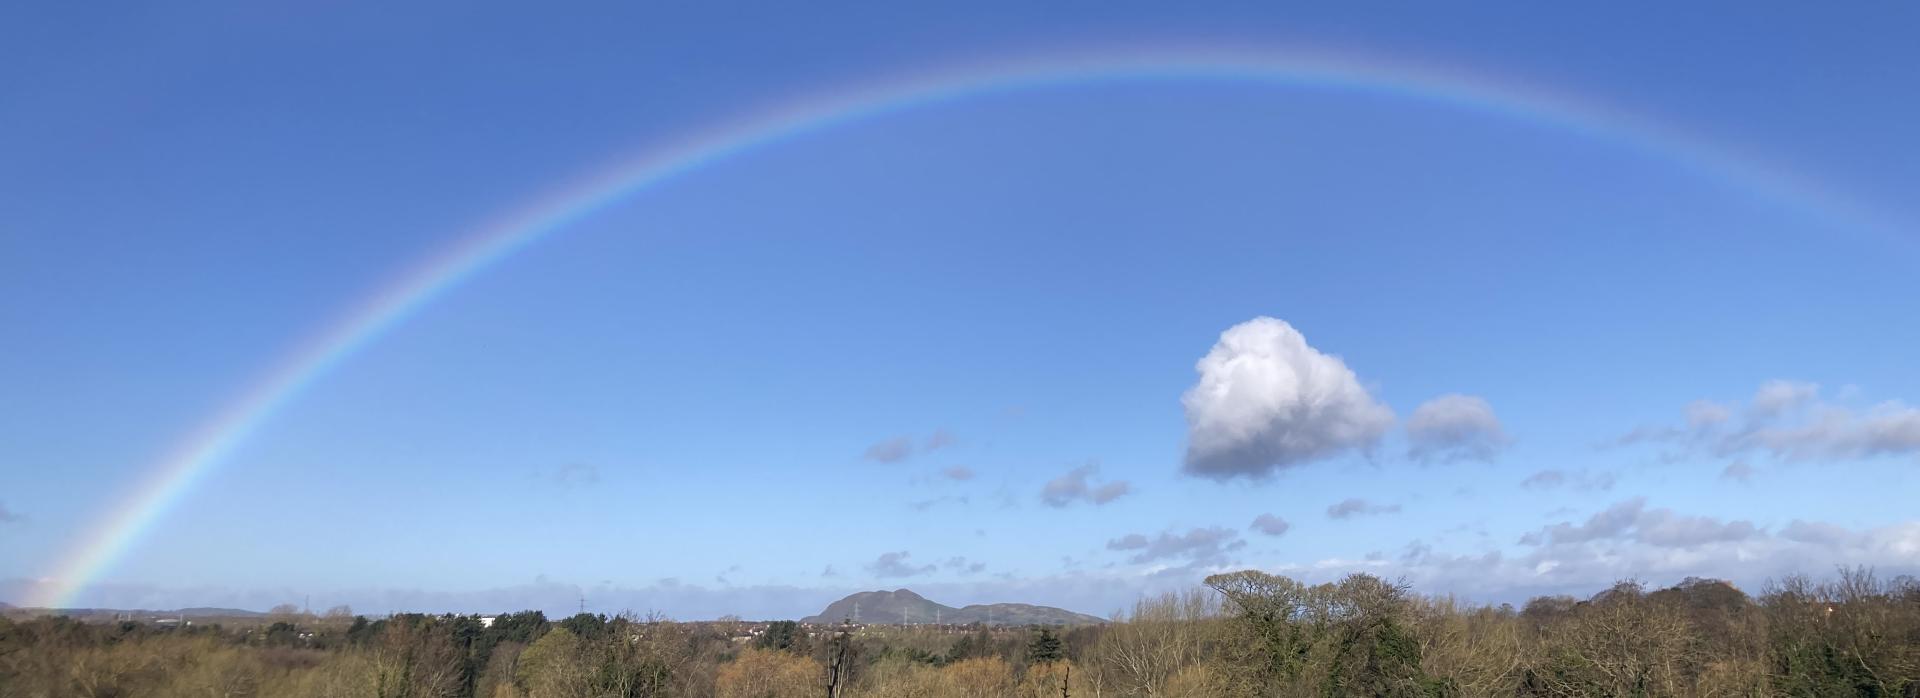 photo of a rainbow in a blue sky with a single cloud underneath it